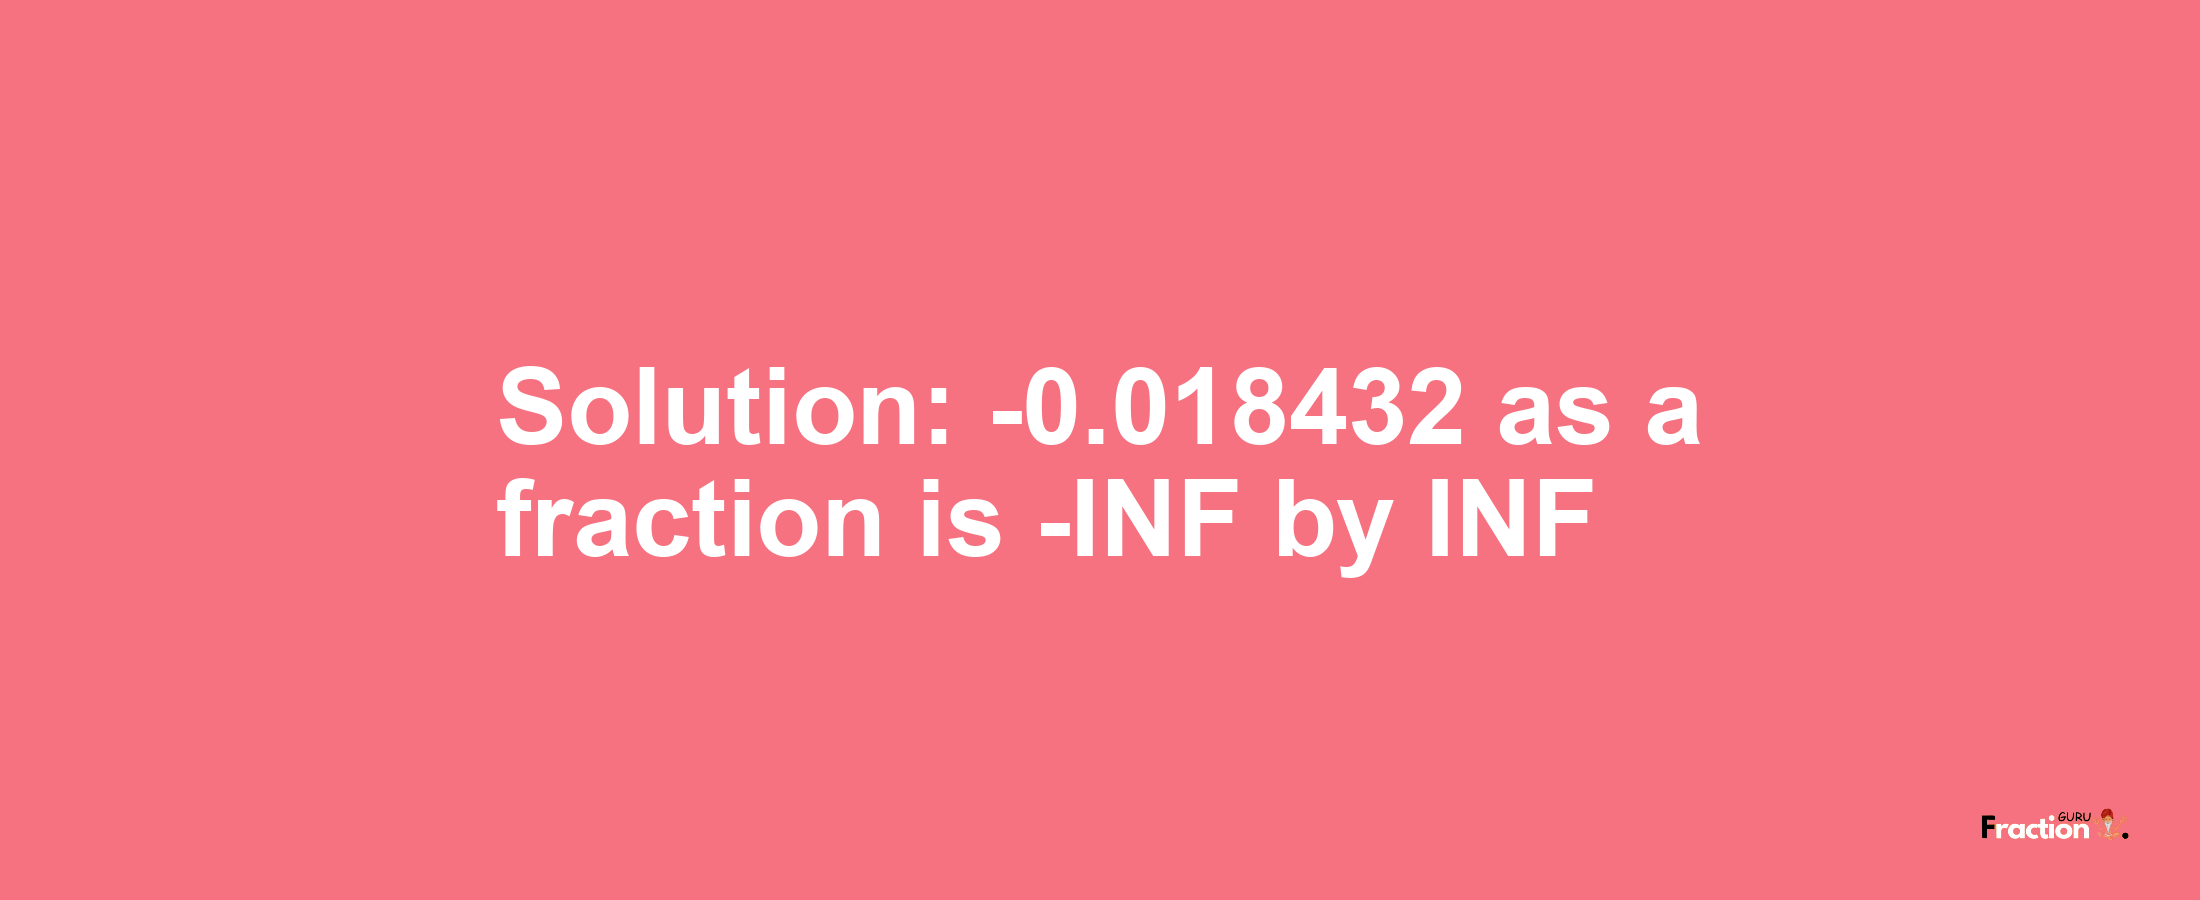 Solution:-0.018432 as a fraction is -INF/INF